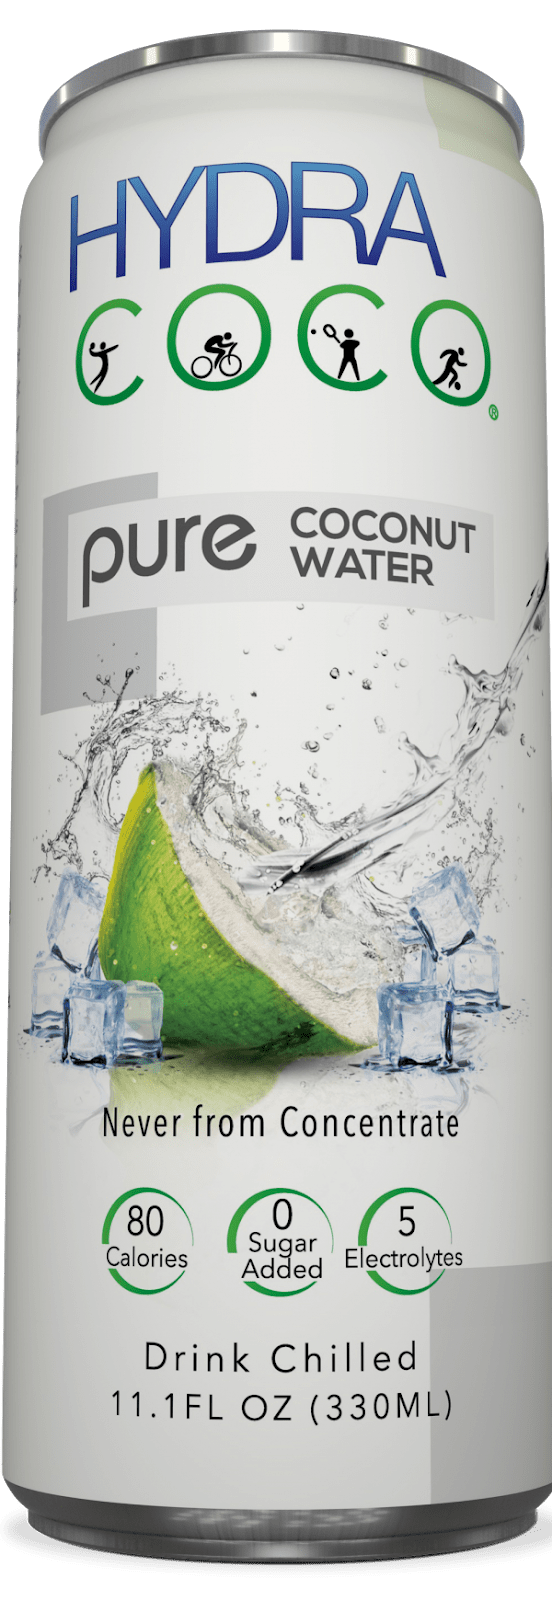 Is Pure Coconut Water Beneficial For You?